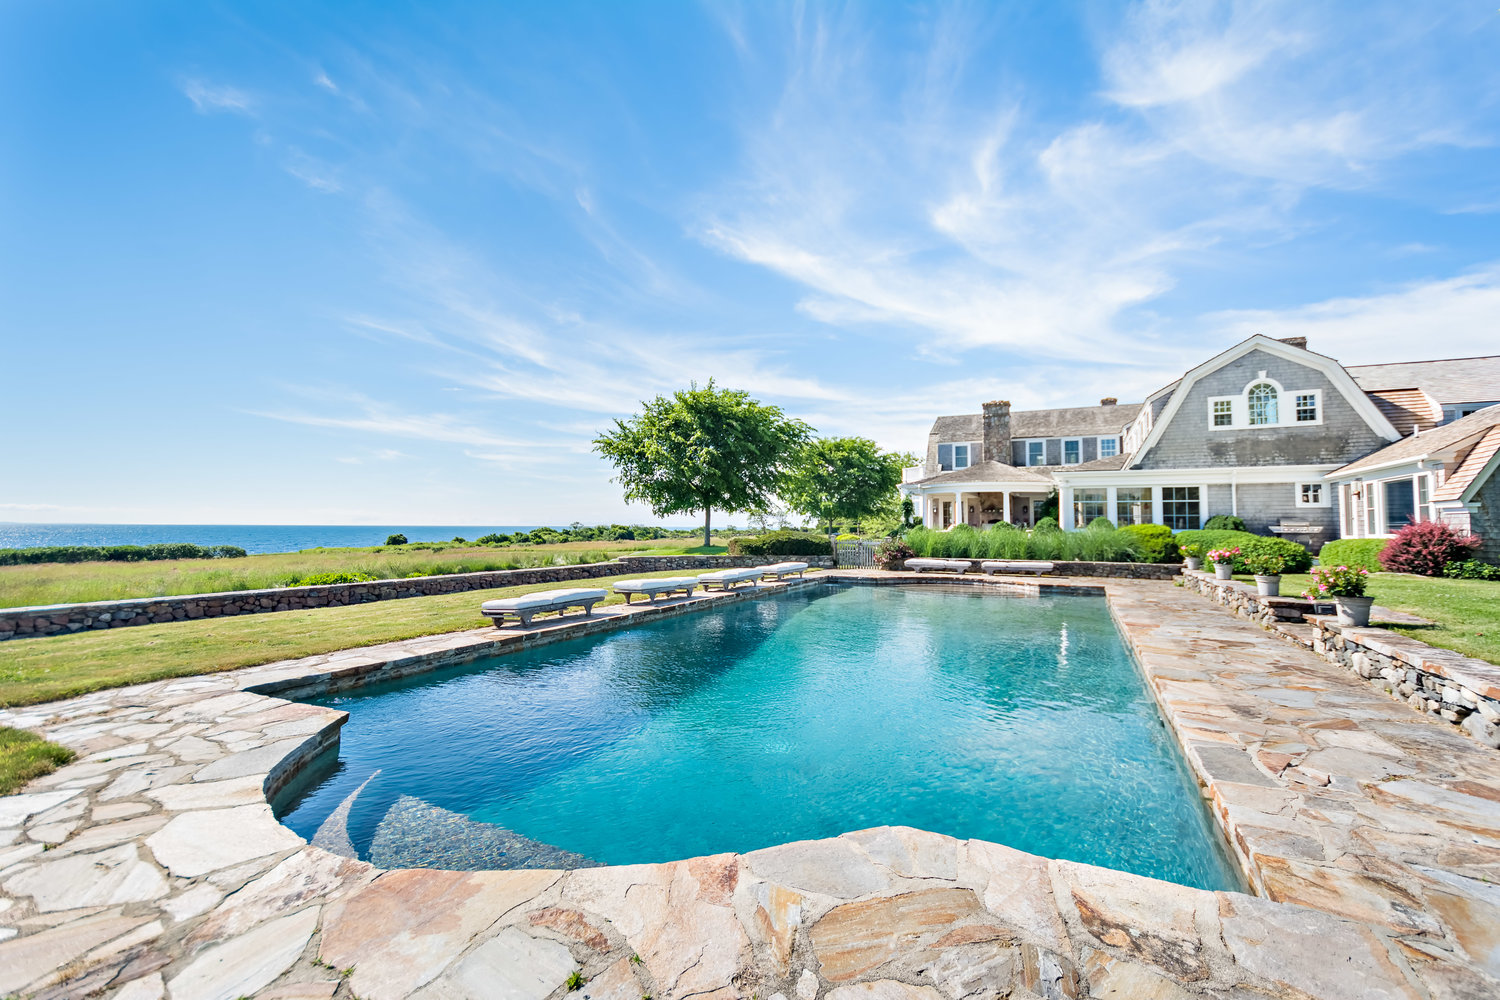 Sealands with its large pool and stone deck overlooking the ocean.